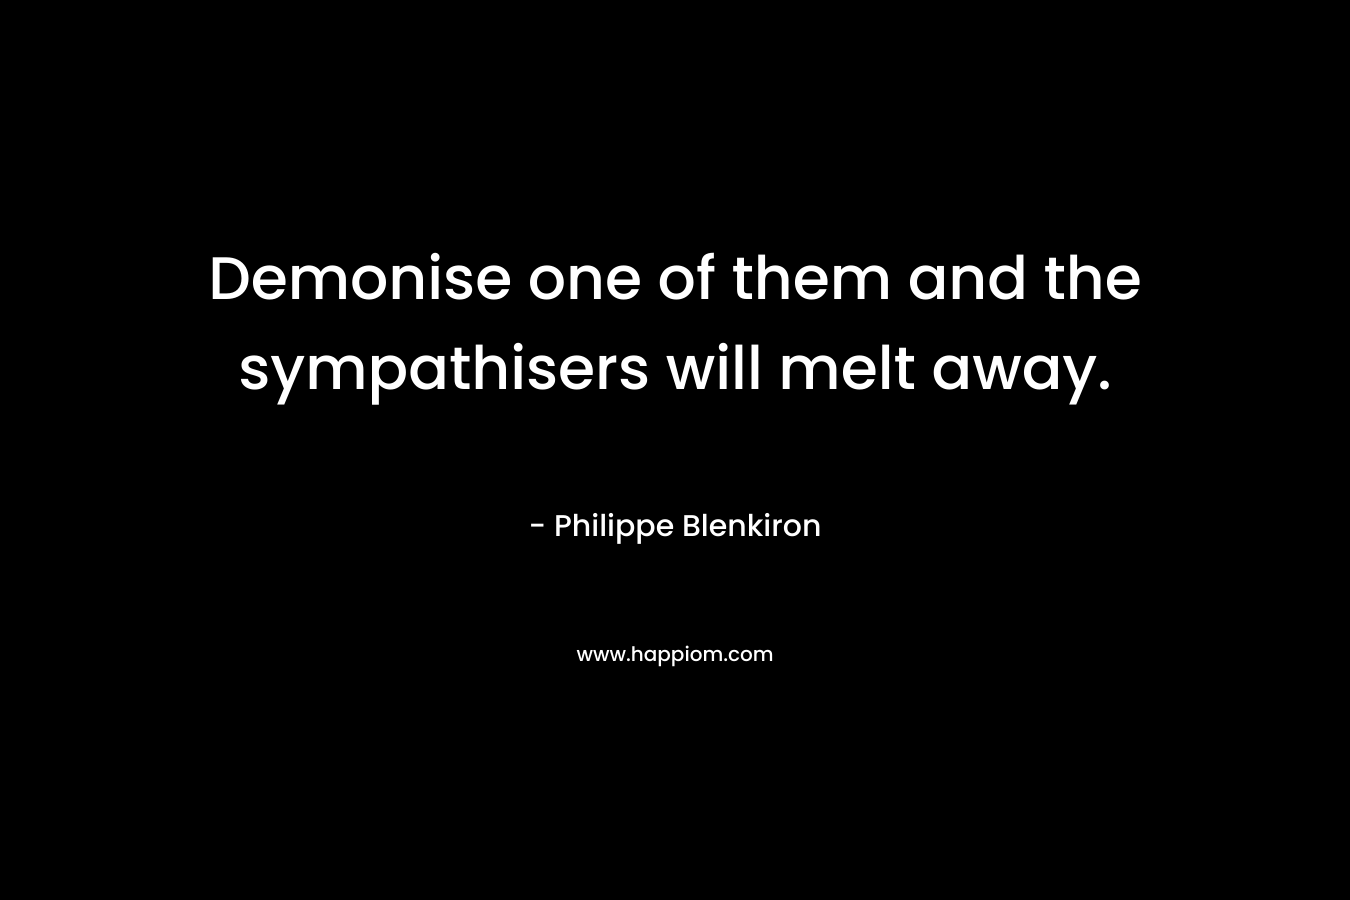 Demonise one of them and the sympathisers will melt away. – Philippe Blenkiron